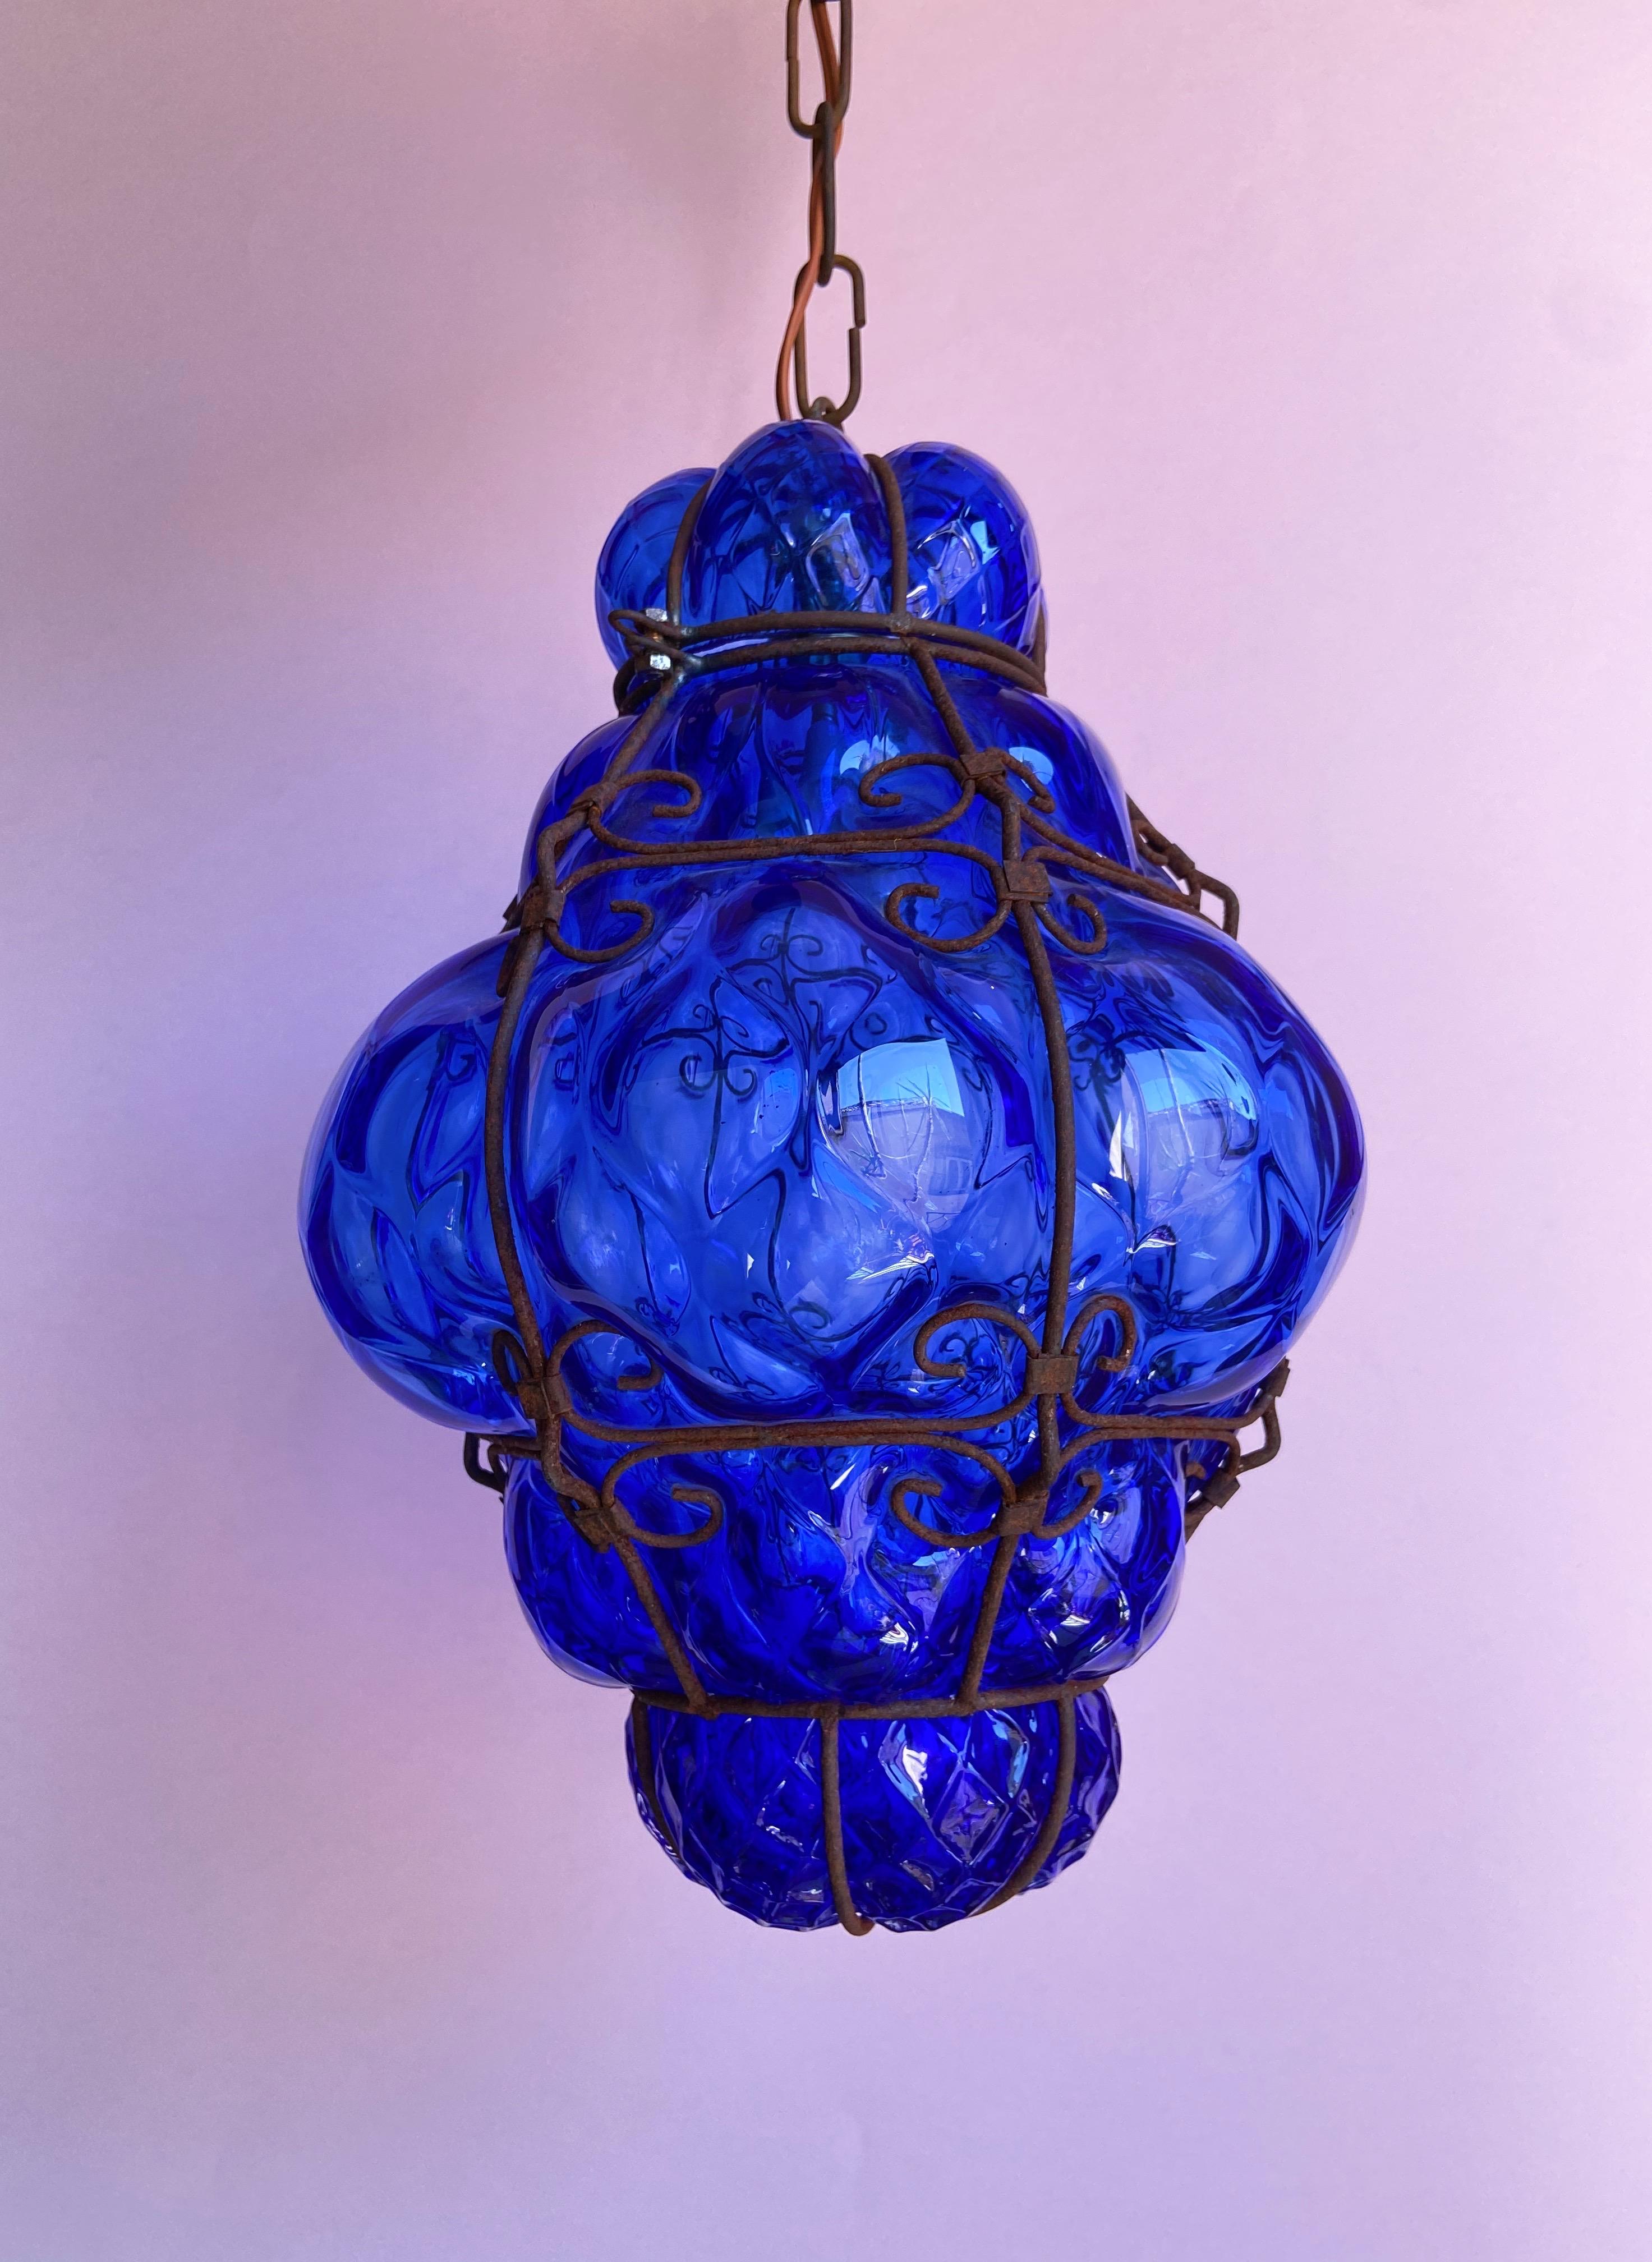 Venetian wire cage lantern by Seguso. Rare in cobalt blue color.
Can be used indoor or outdoor.
Single E14 light bulb

Details
Creator: Seguso, Murano
Dimensions: Height 30 cm Diameter: 20 cm
Materials and Techniques: Metal, Glass
Place of